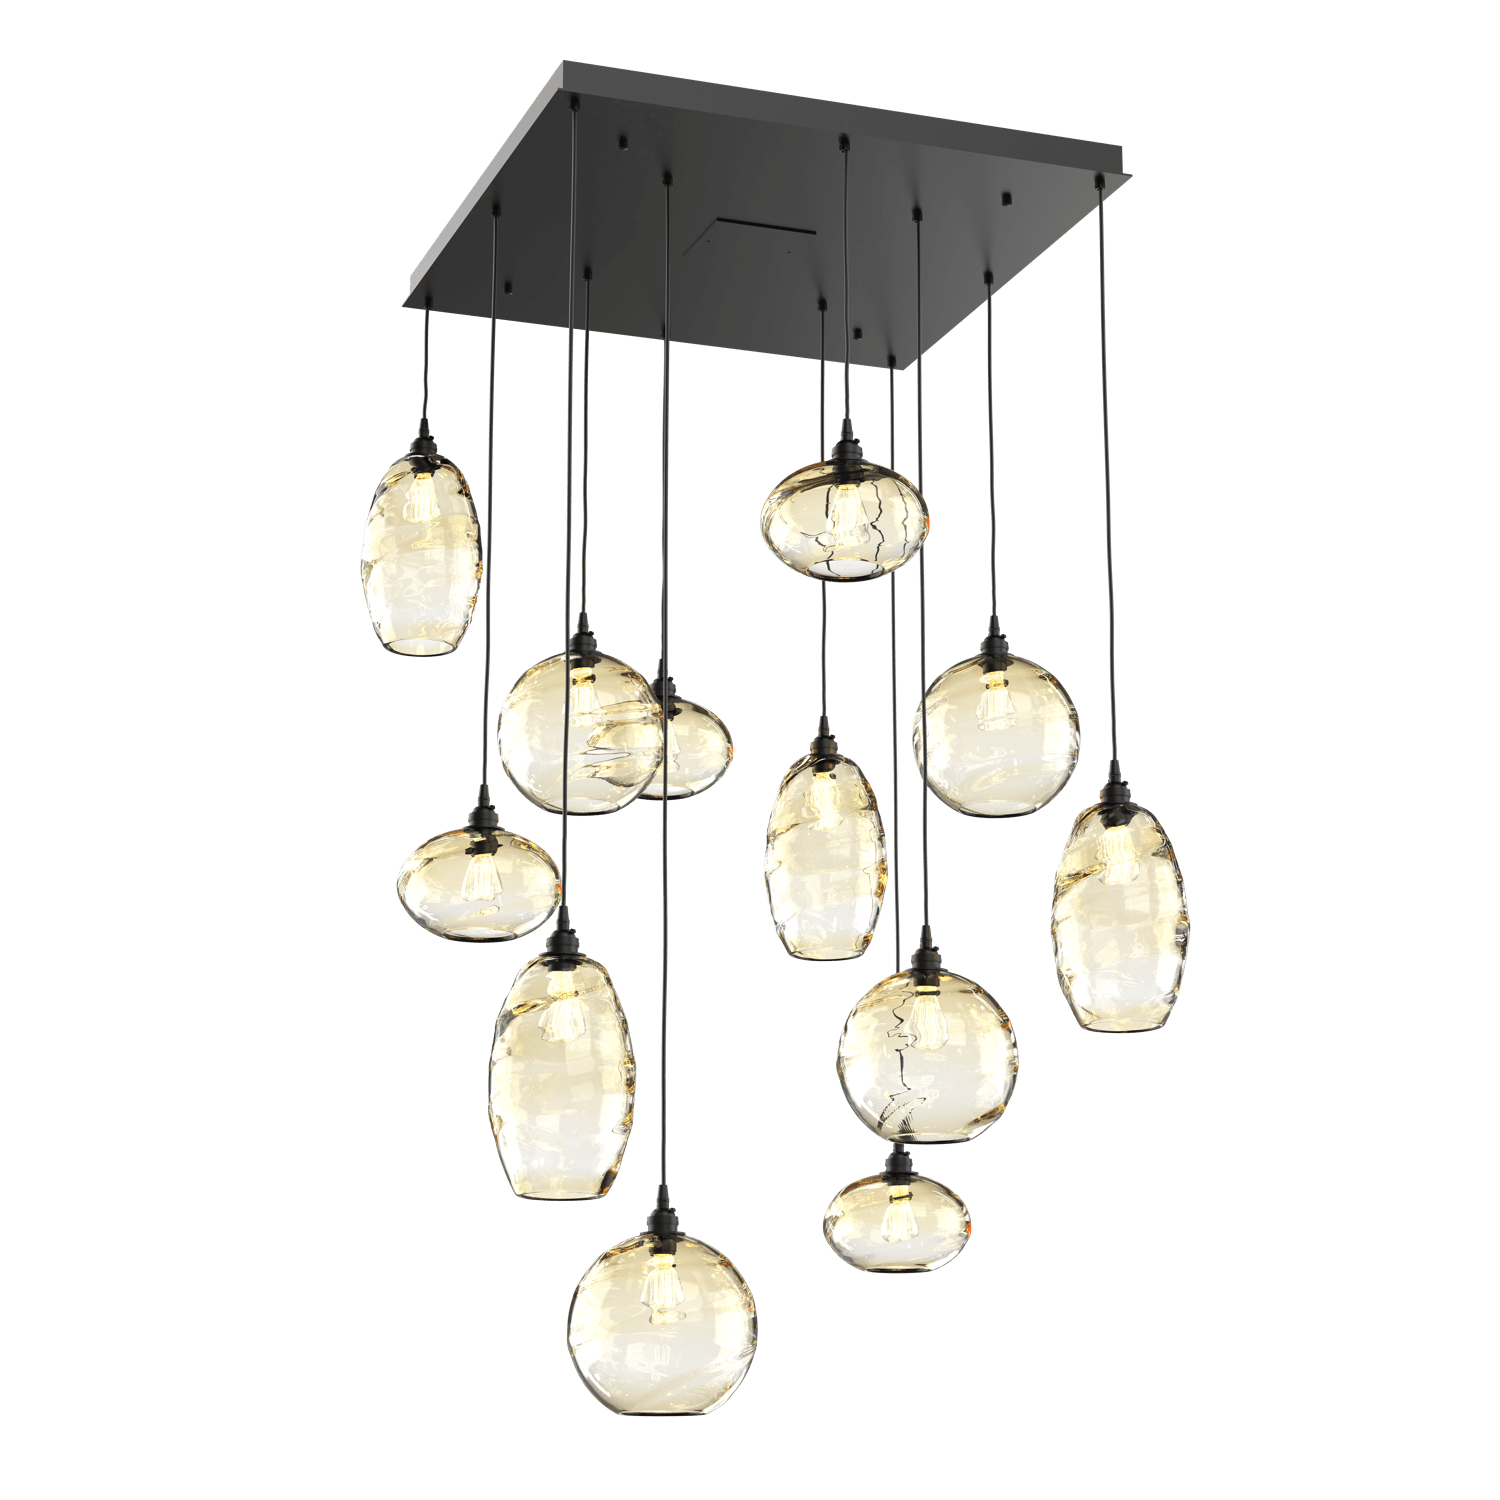 CHB0048-12-MB-OA-Hammerton-Studio-Optic-Blown-Glass-Misto-12-light-square-pendant-chandelier-with-matte-black-finish-and-optic-amber-blown-glass-shades-and-incandescent-lamping